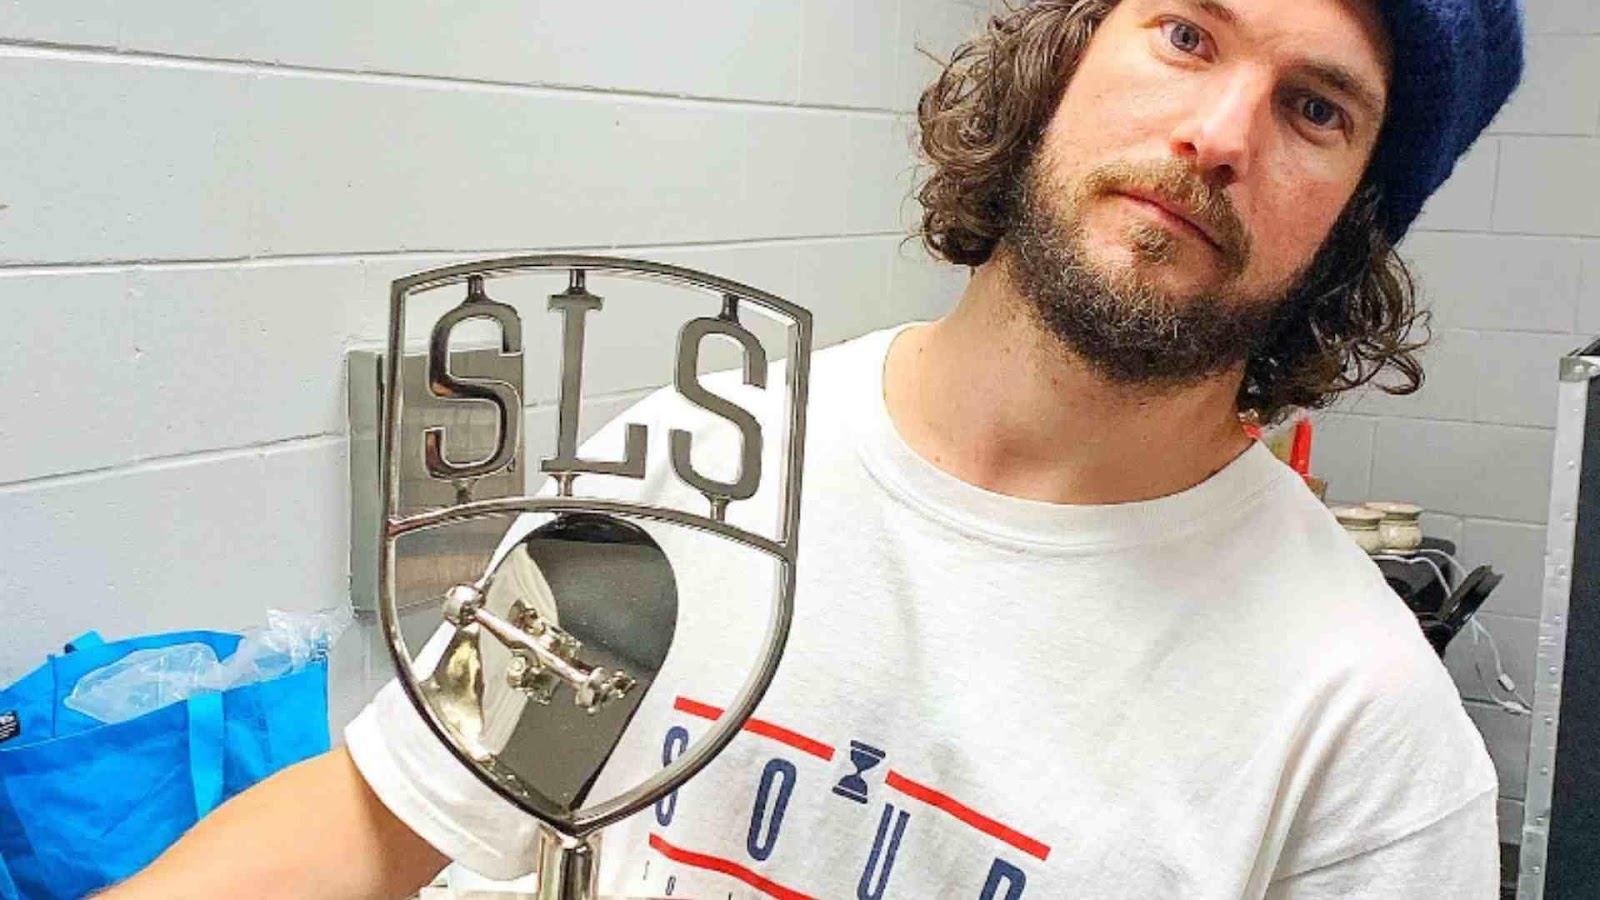 Awards & Achievements of Torey Pudwill